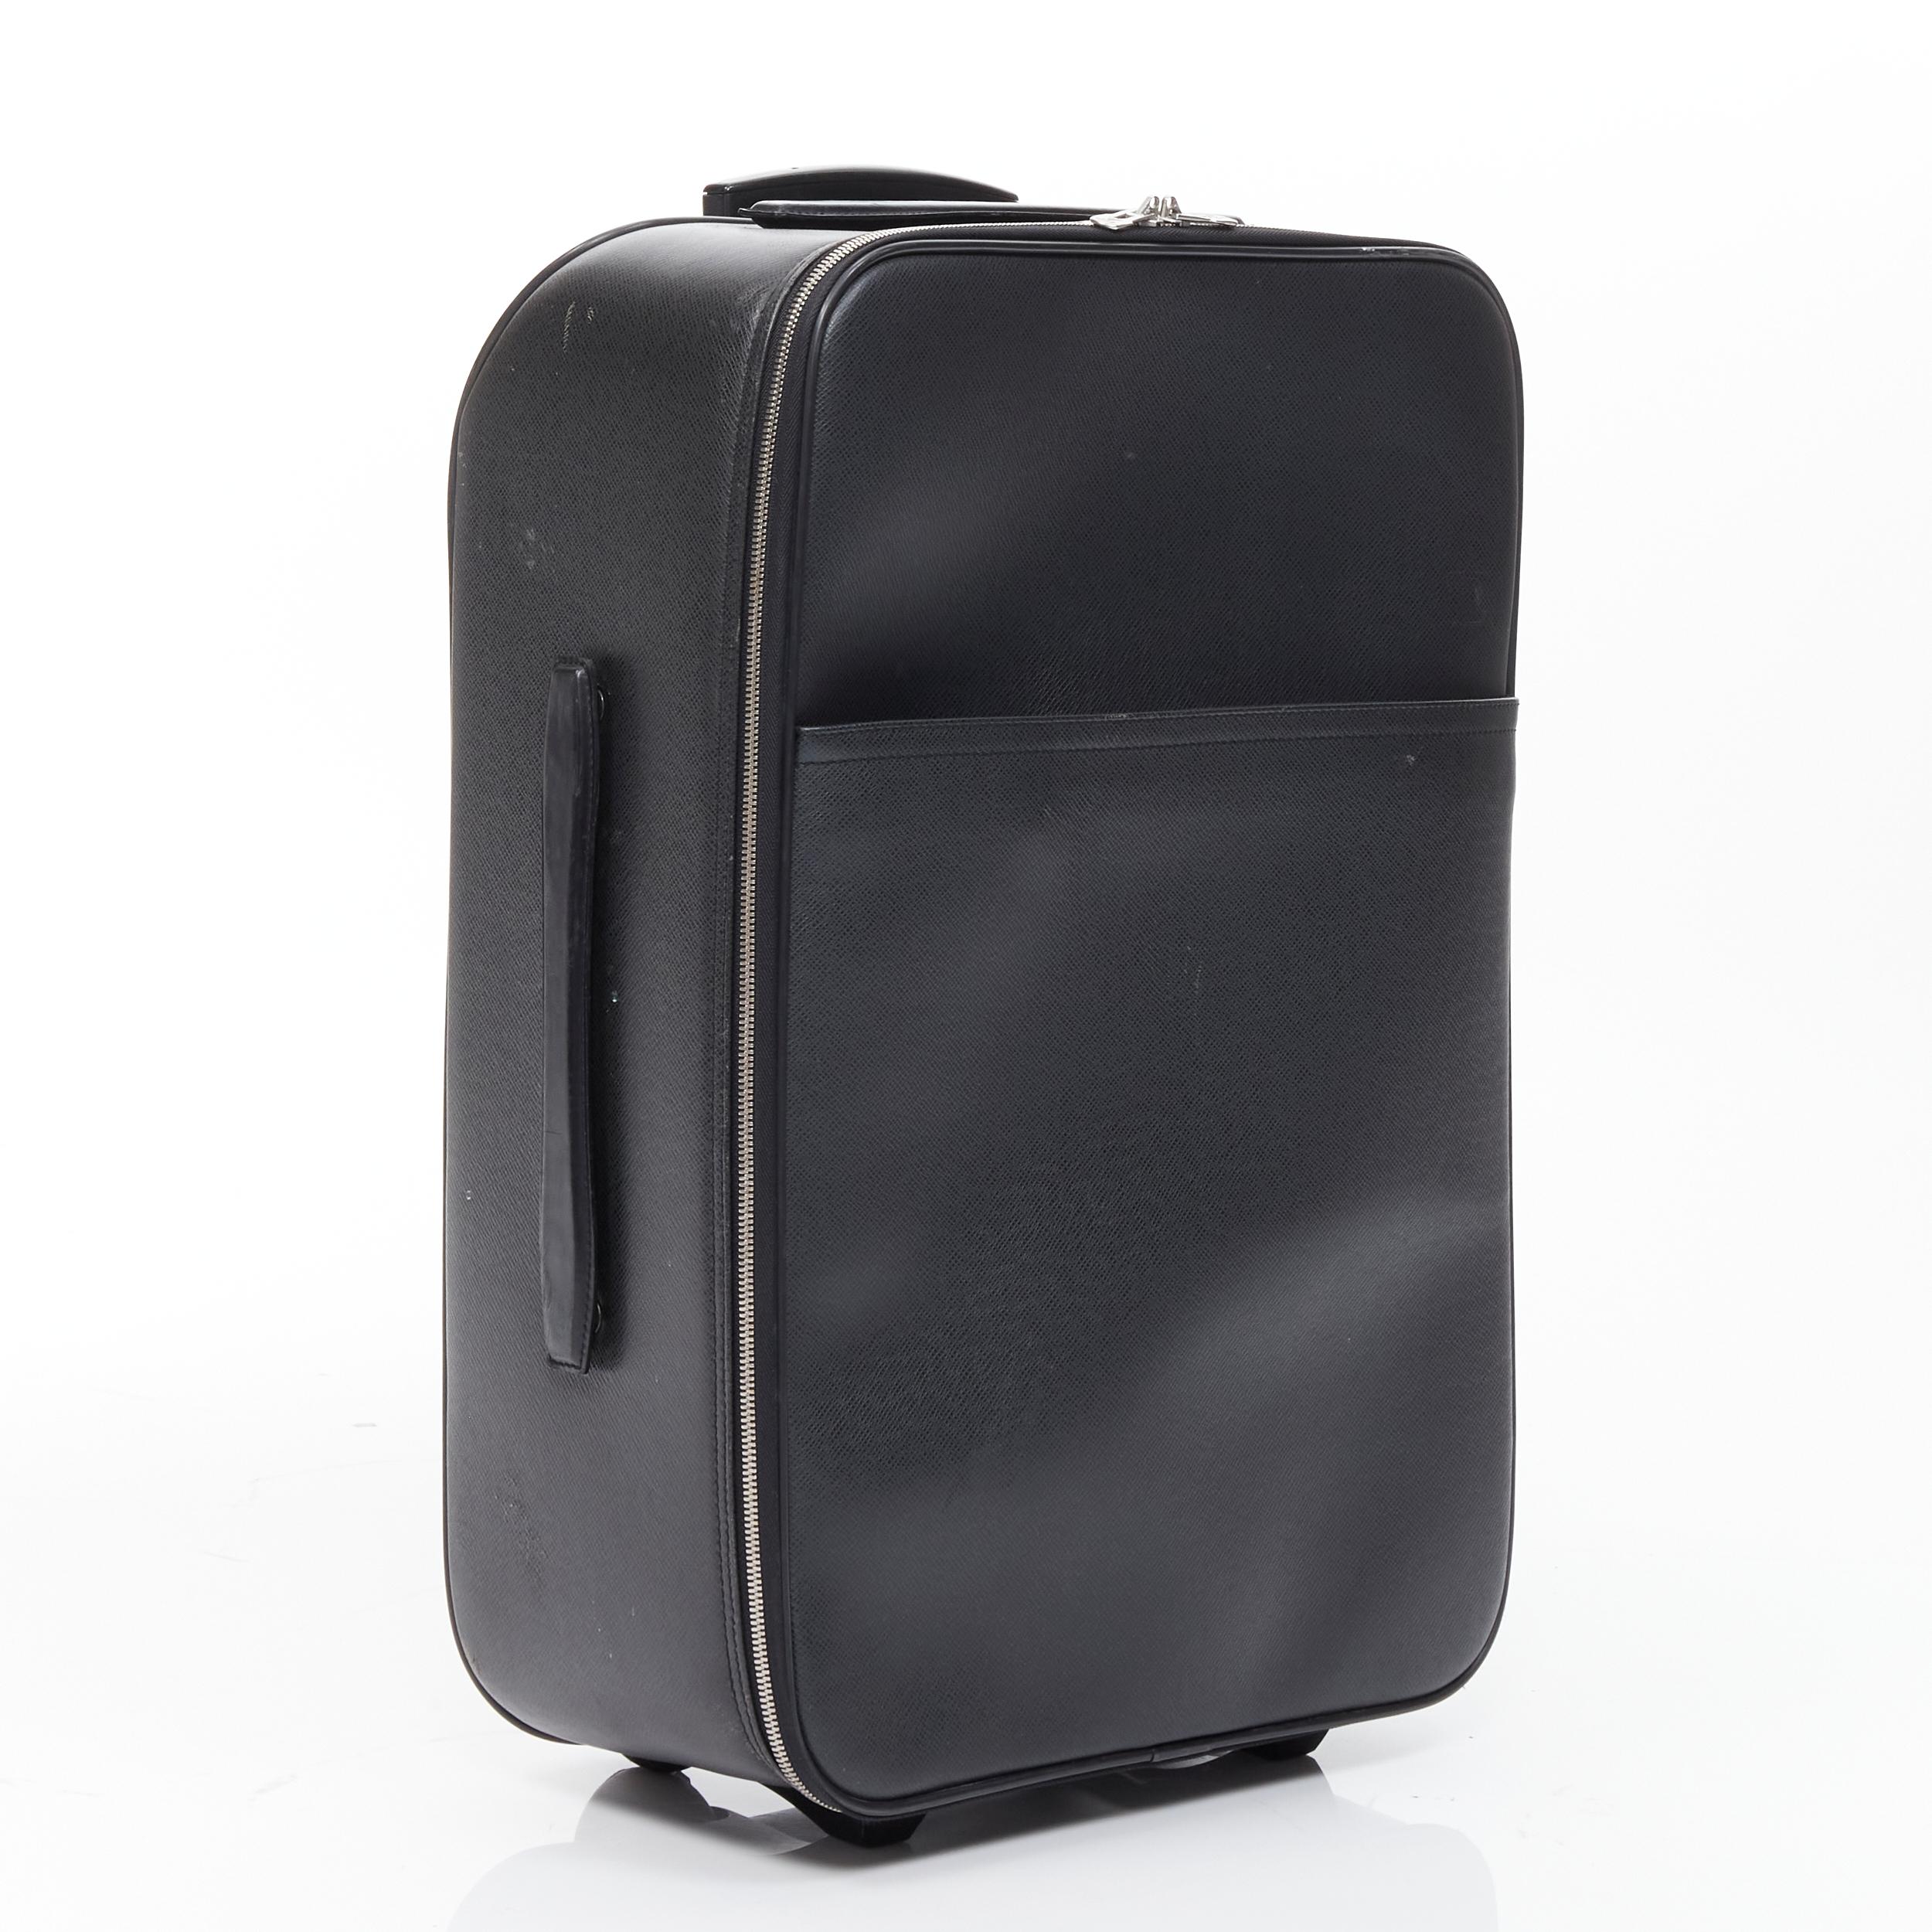 LOUIS VUITTON Taiga Pegase 60 Business black rolling suitcase luggage 
Reference: GIYG/A00098 
Brand: Louis Vuitton 
Model: Pegase Taiga 
Material: Leather 
Color: Black 
Pattern: Solid 
Closure: Zip 
Extra Detail: The PâˆšÂ©gase 60 by Louis Vuitton